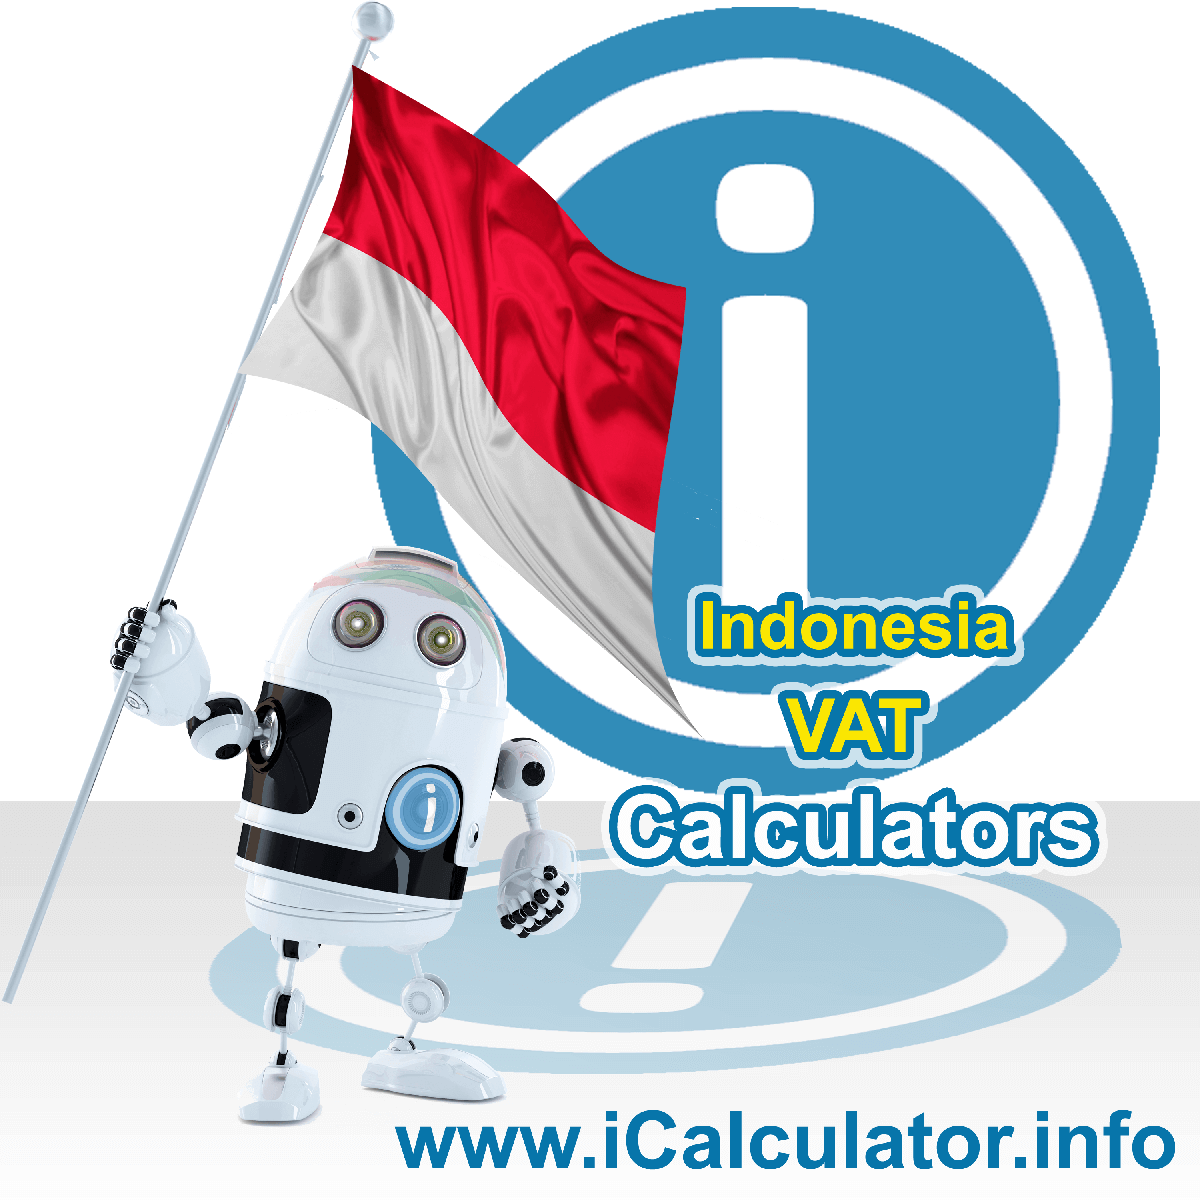 Indonesia VAT Calculator. This image shows the Indonesia flag and information relating to the VAT formula used for calculating Value Added Tax in Indonesia using the Indonesia VAT Calculator in 2023